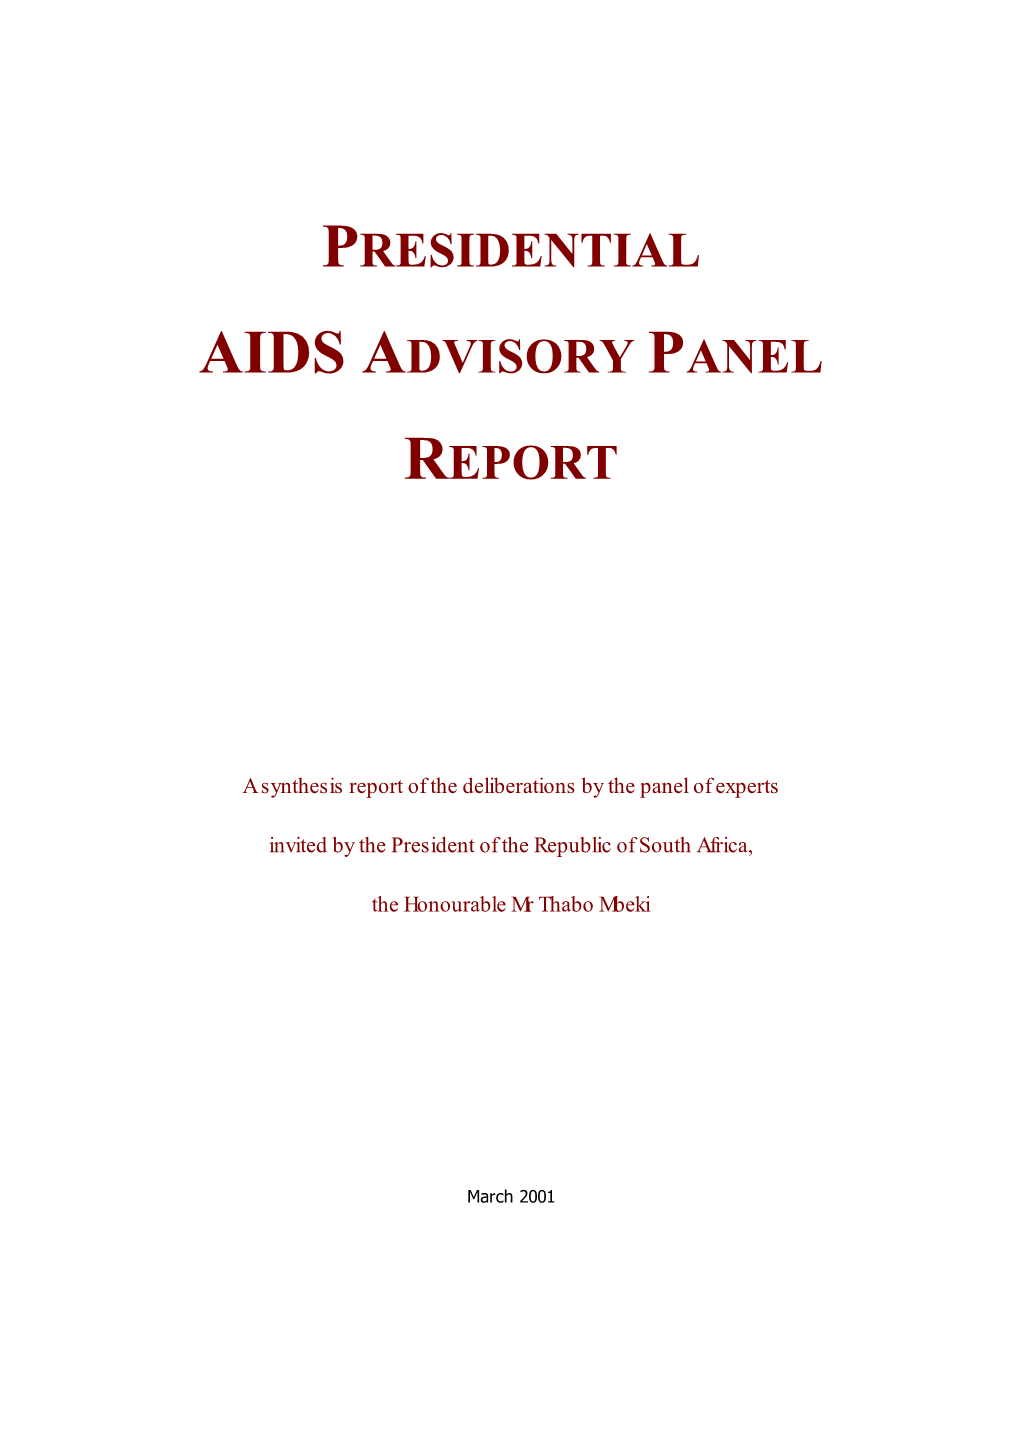 Presidential Aids Advisory Panel Report 2 3.2 OVERVIEW on the NECESSITY for SURVEILLANCE